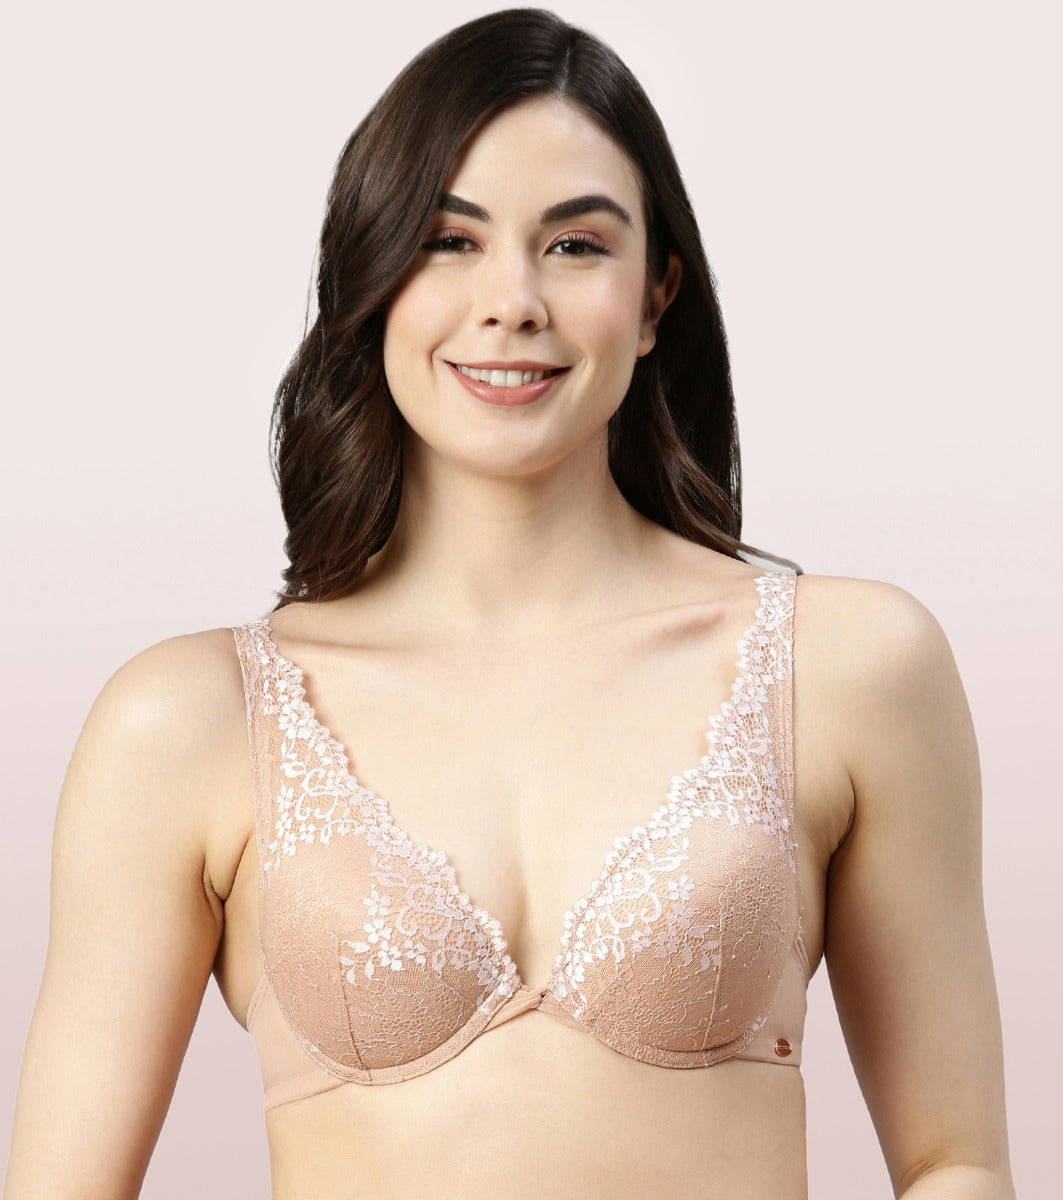 Enamor F125 LONGLINE COMFORT LACE BRA PADDED WIREFREE HIGH COVERAGE